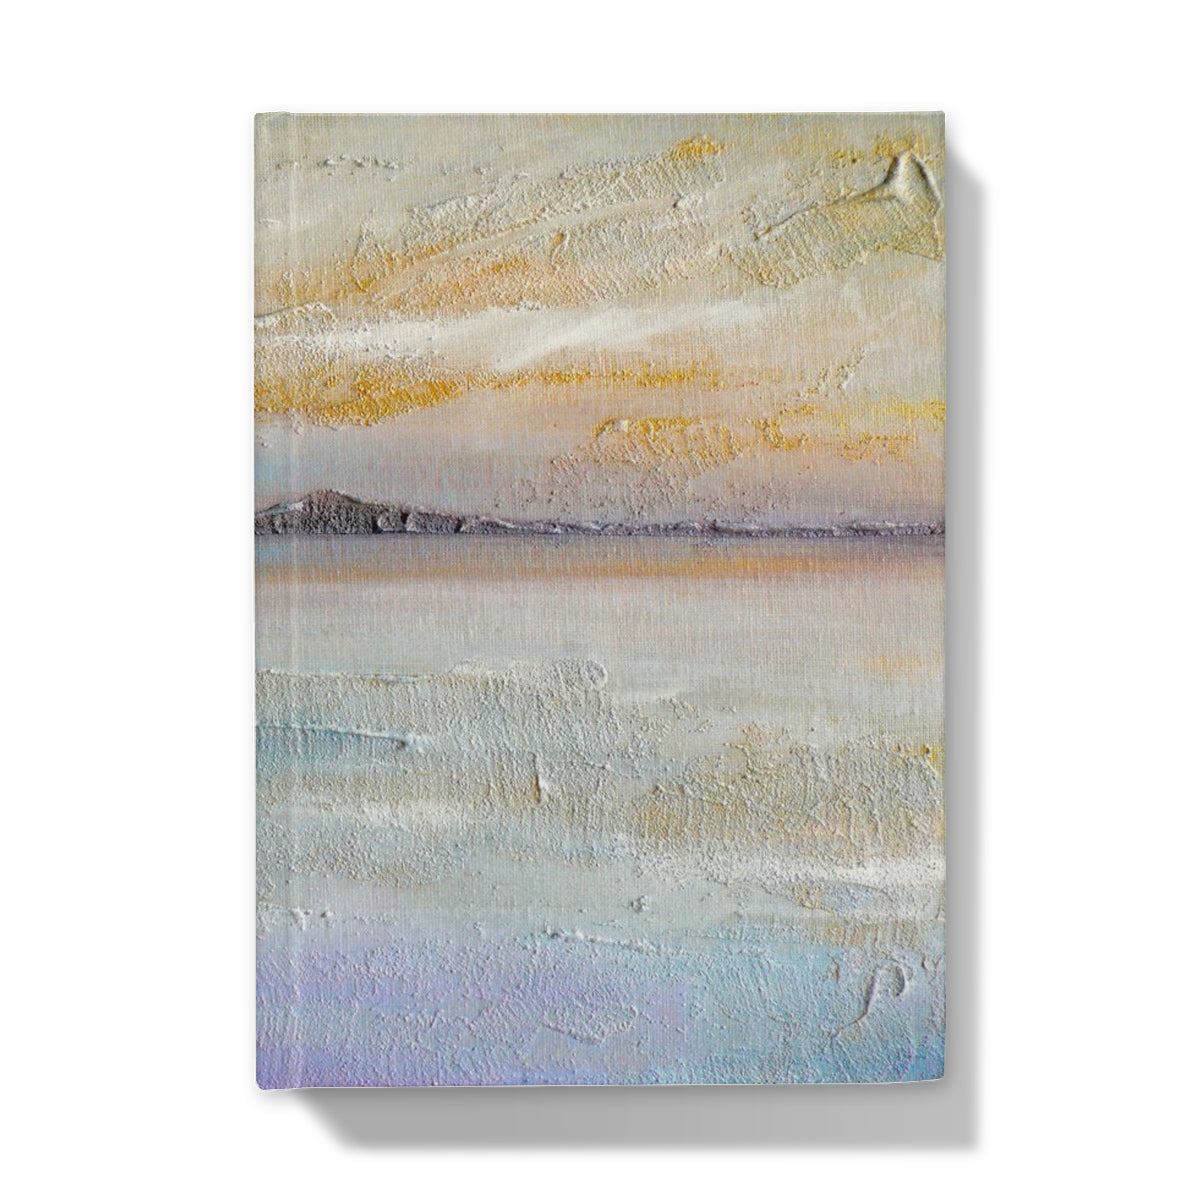 Sollas Beach South Uist Art Gifts Hardback Journal-Journals & Notebooks-Hebridean Islands Art Gallery-A4-Lined-Paintings, Prints, Homeware, Art Gifts From Scotland By Scottish Artist Kevin Hunter